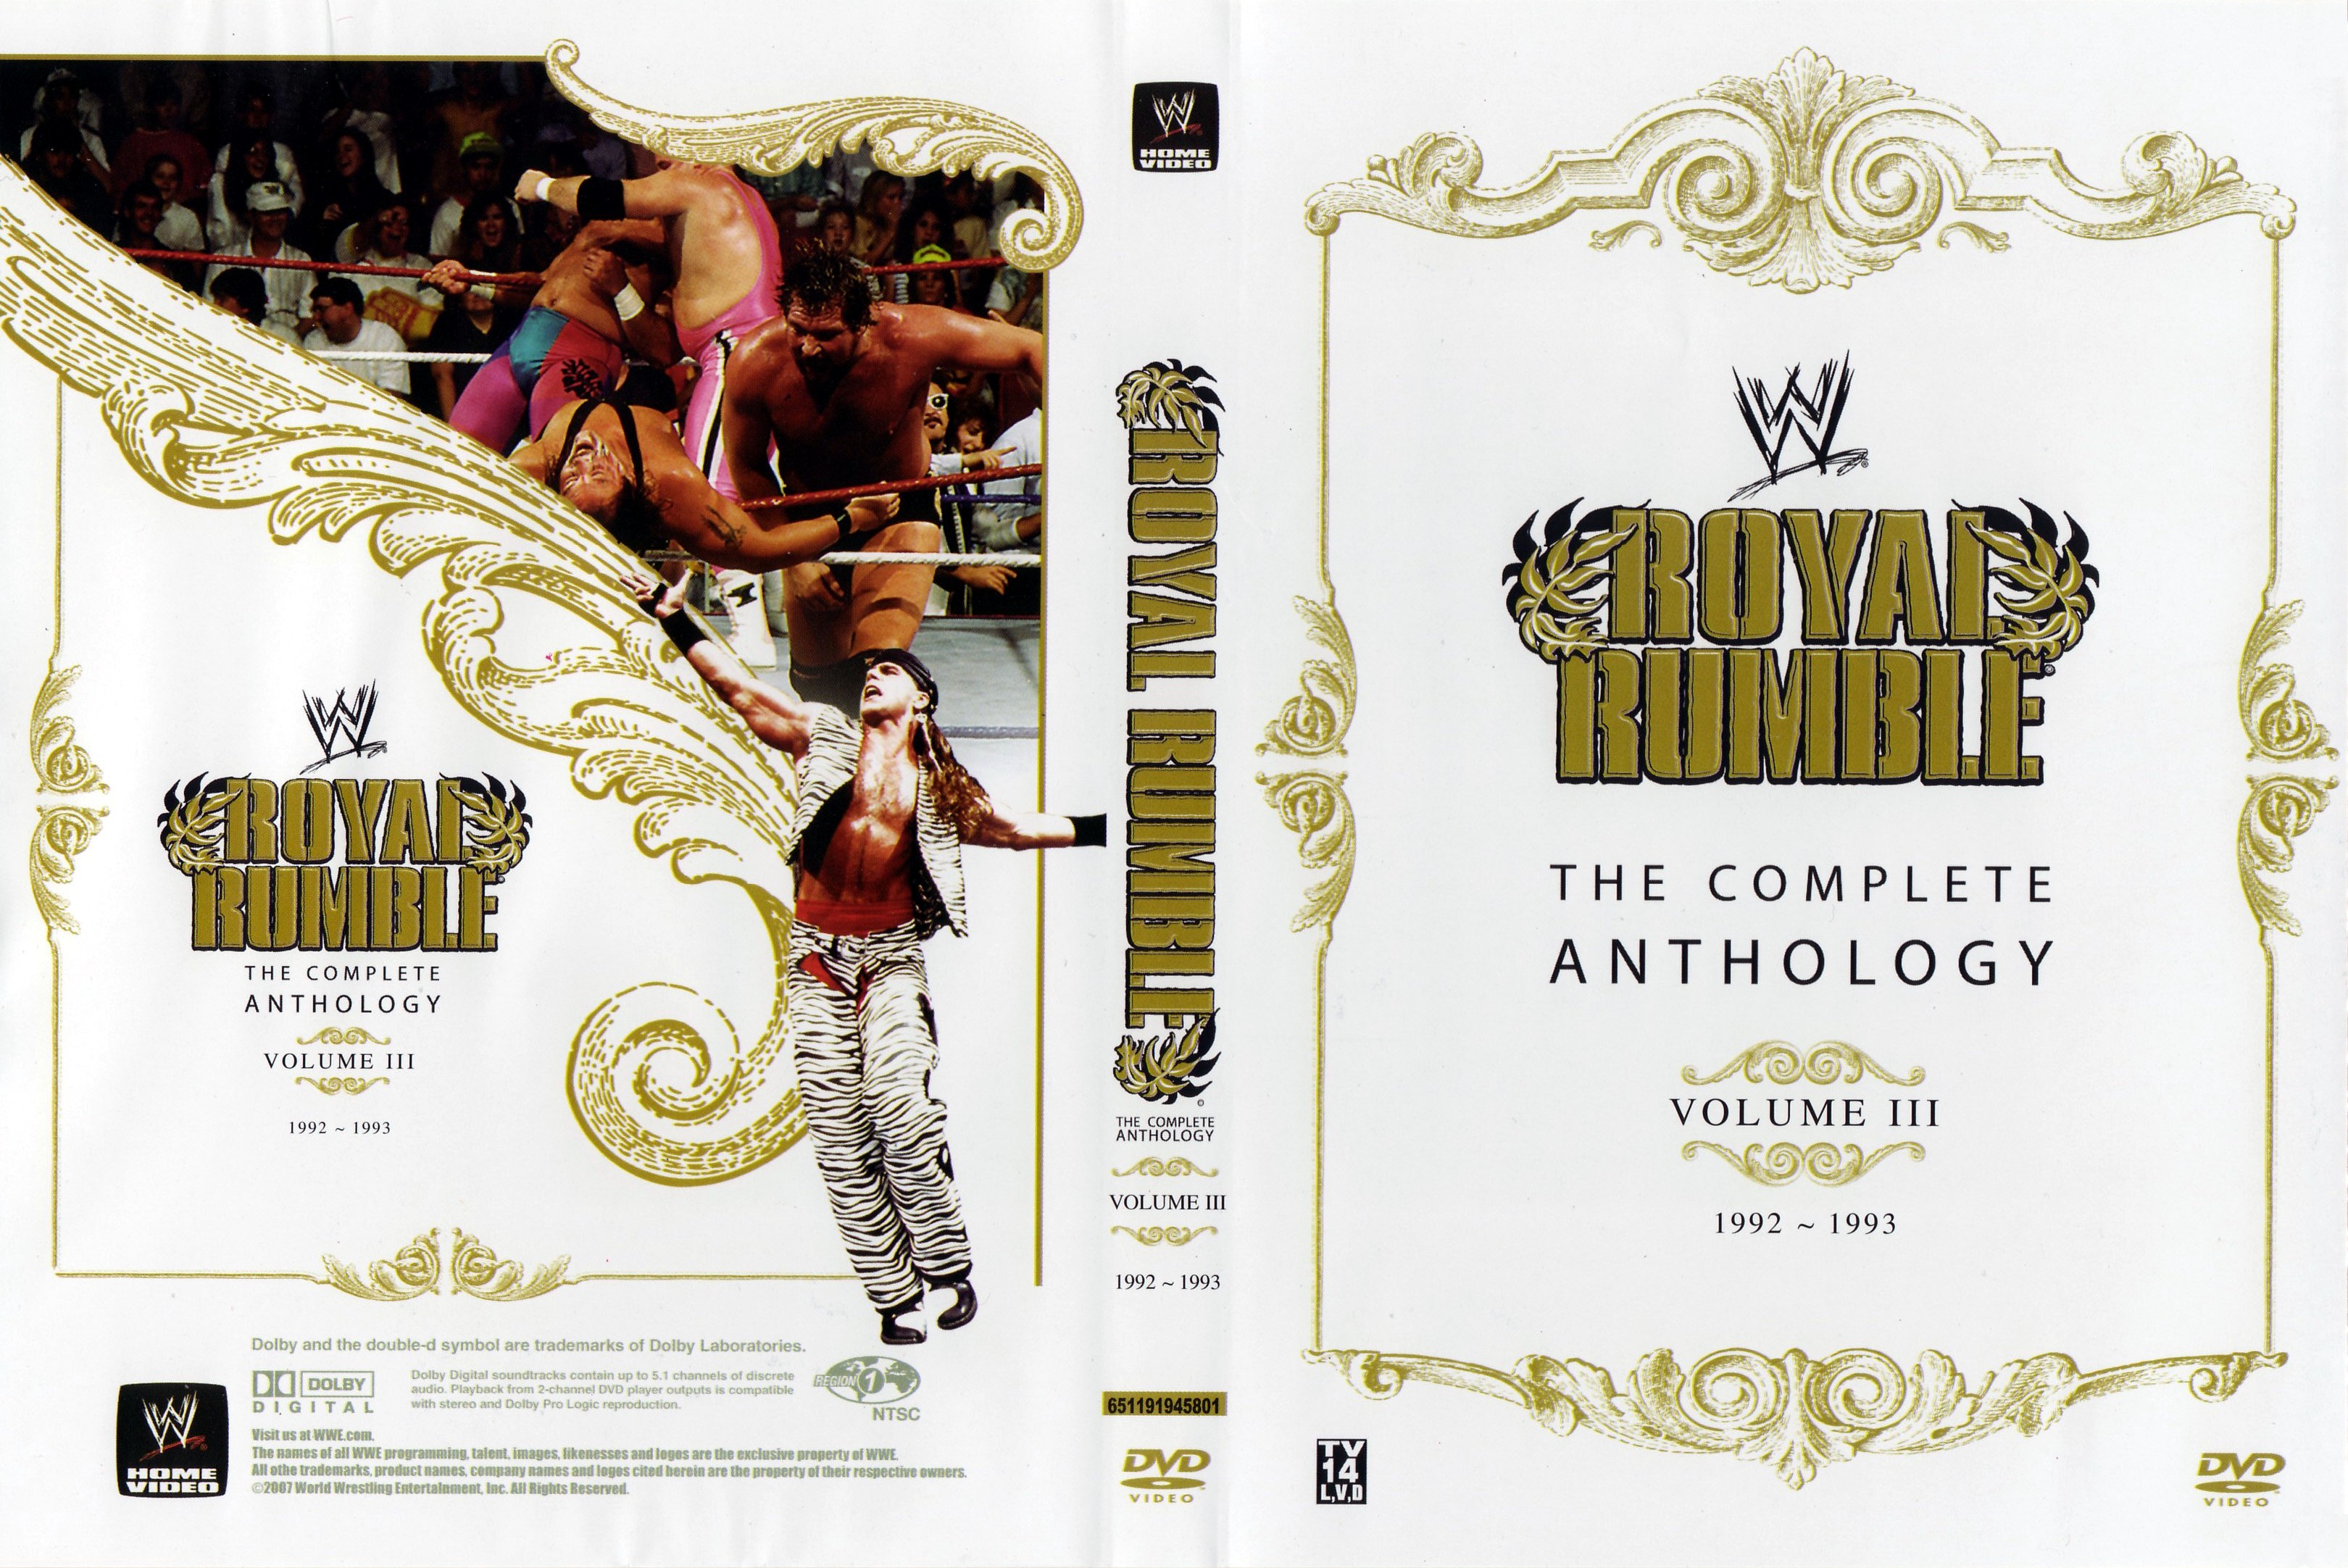 Jaquette DVD WWE Royal Rumble the complete antology vol 03